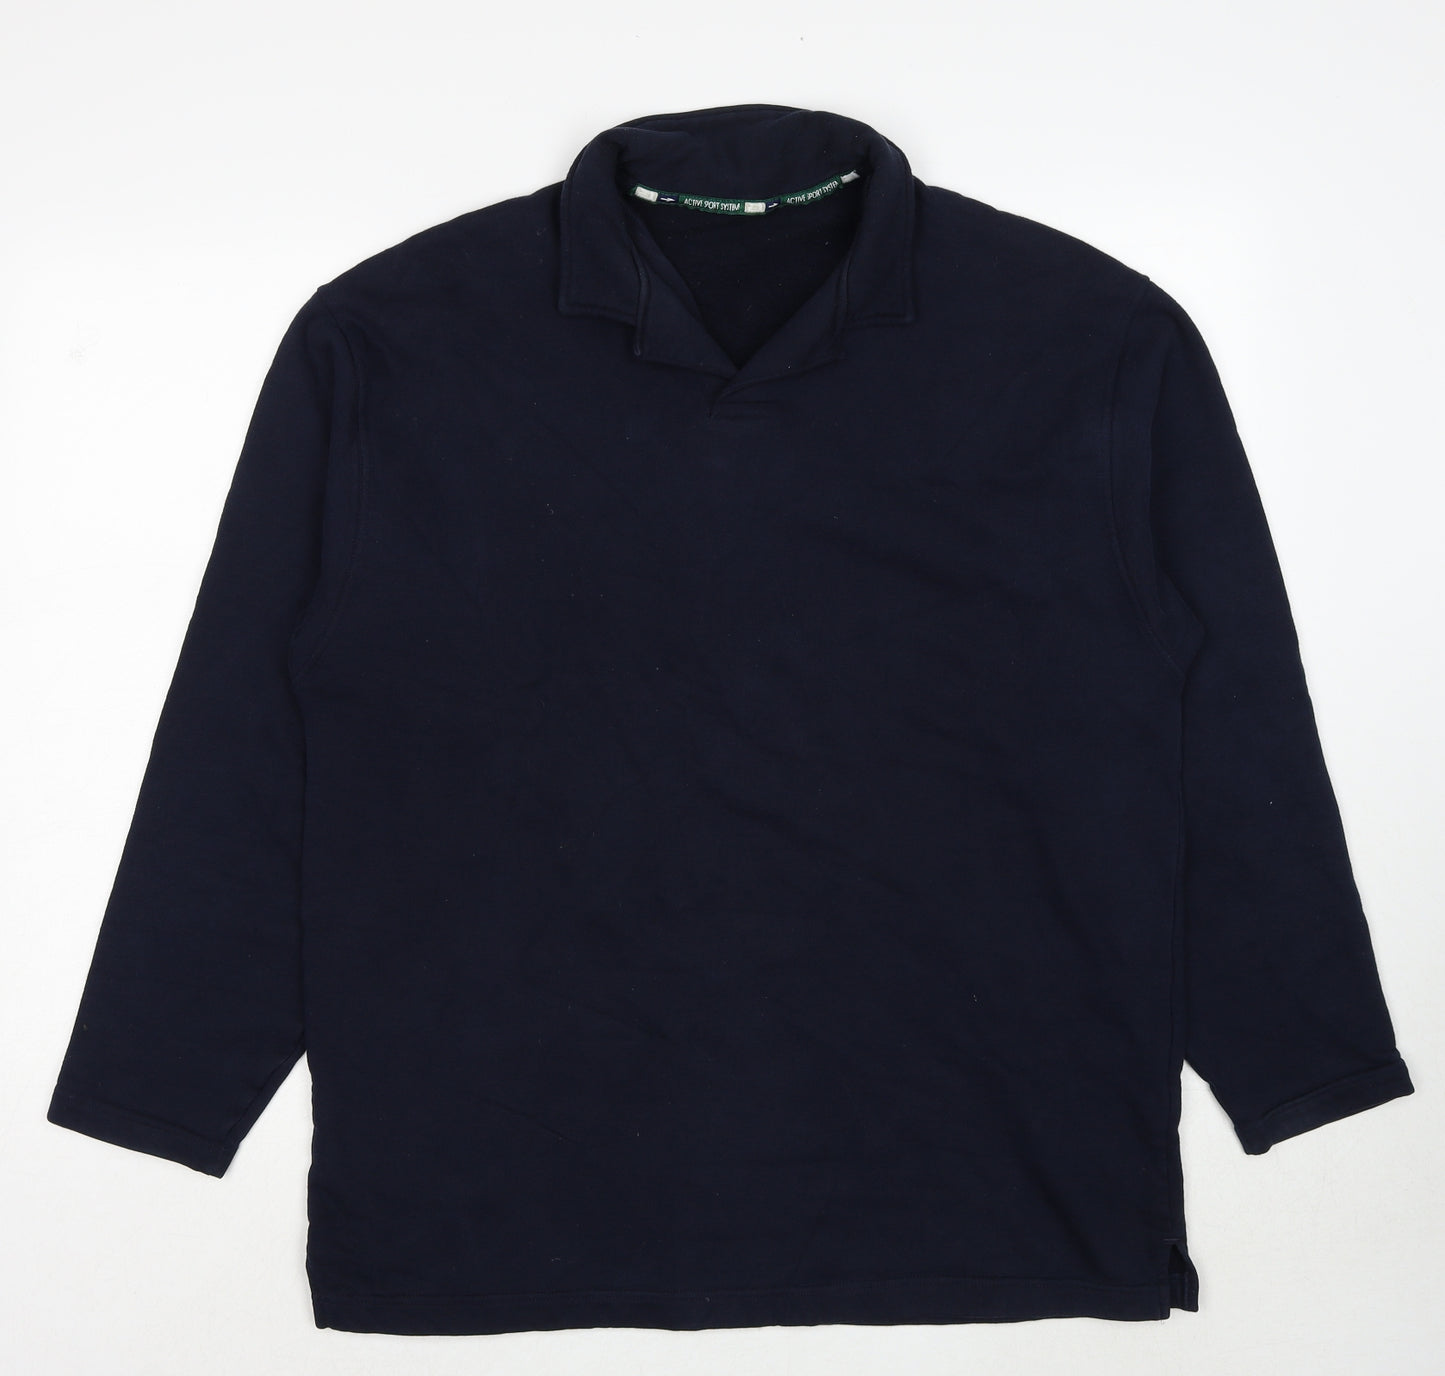 Marks and Spencer Mens Blue Cotton Pullover Sweatshirt Size M